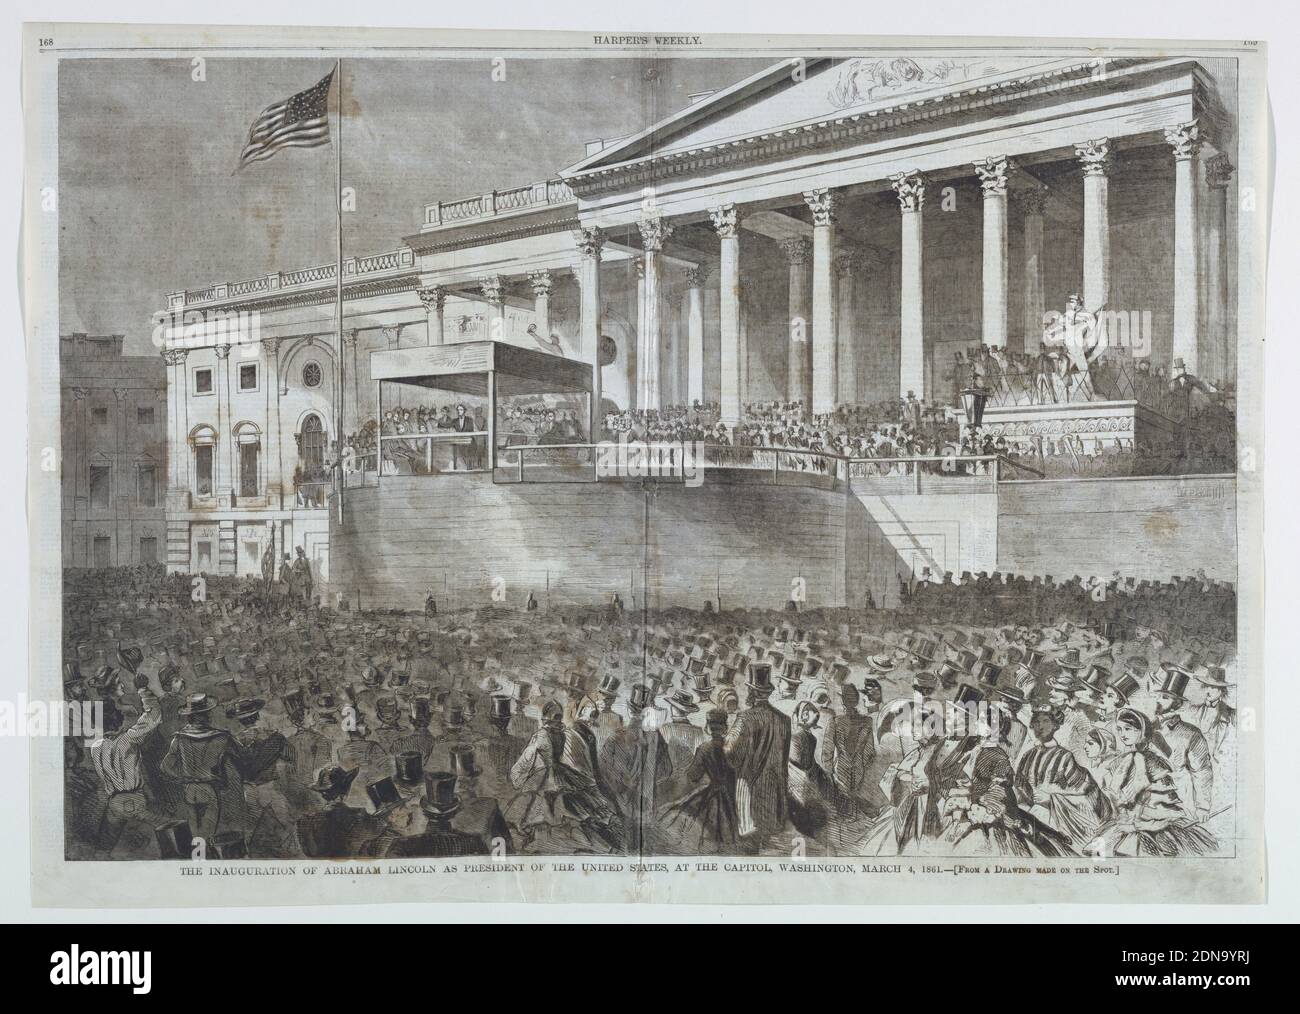 The Inauguration of Abraham Lincoln as President of the United States at the Capitol, Washington, D.C., March 4, 1861, from Harper's Weekly, March 16, 1861, pp. 168-169., Wood engraving in black ink on newsprint paper, Horizontal scene before the Capitol building showing Lincoln addressing the audience from a specially constructed platform in front of the entrance to the Rotunda, with crowds visible in the foreground., November 16, 1861, graphic design, Print Stock Photo